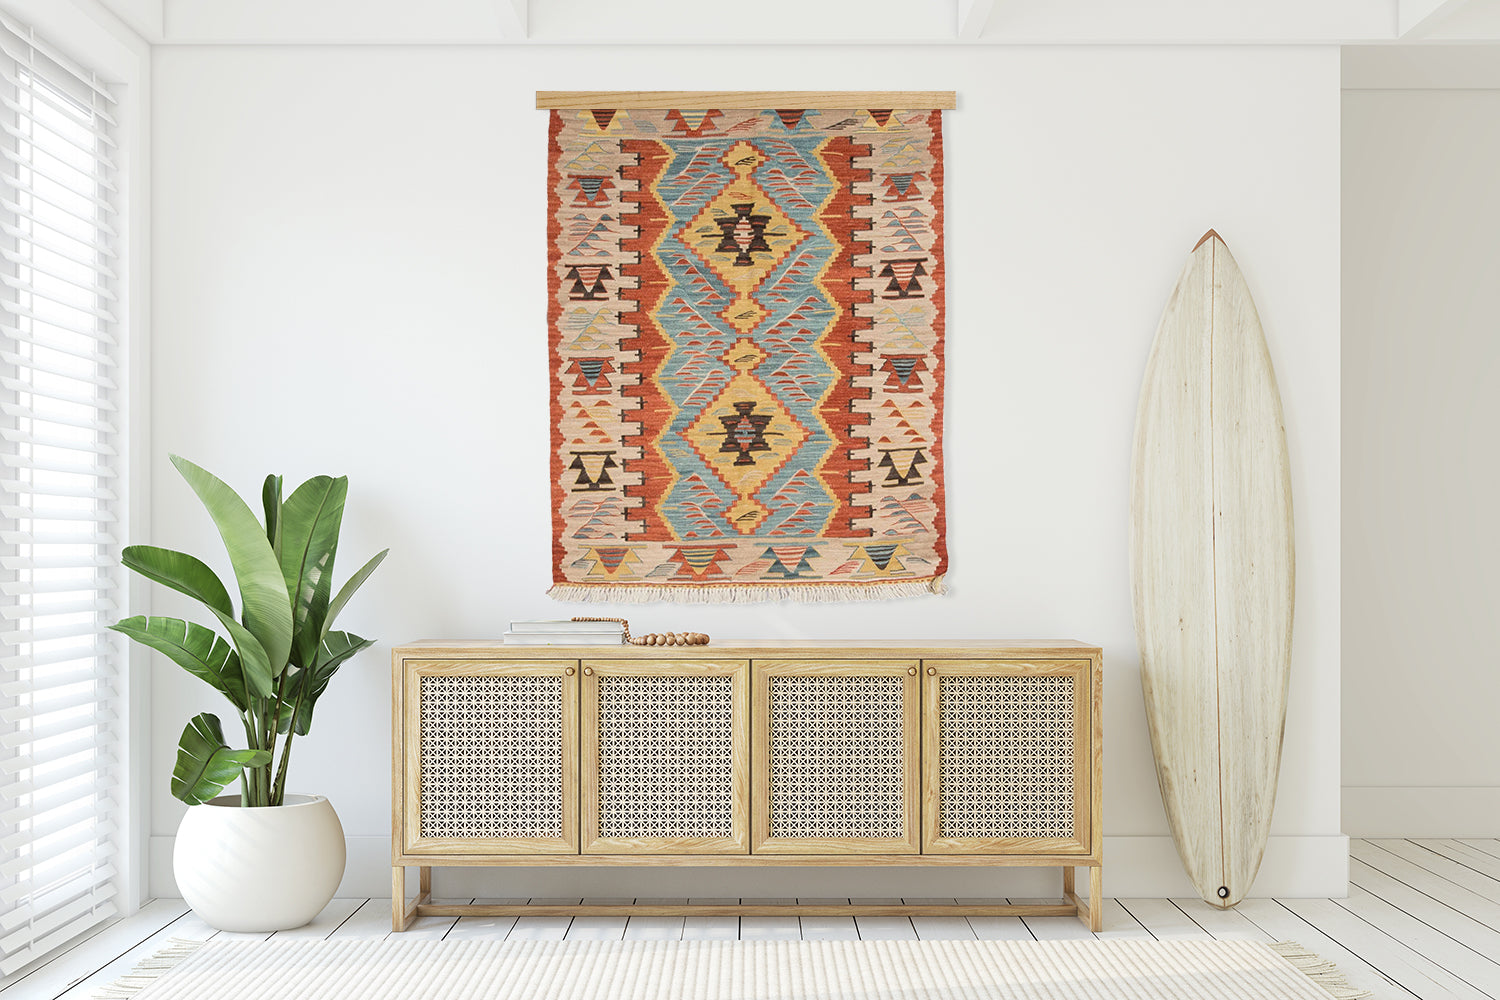 How to Hang Rugs on the Wall